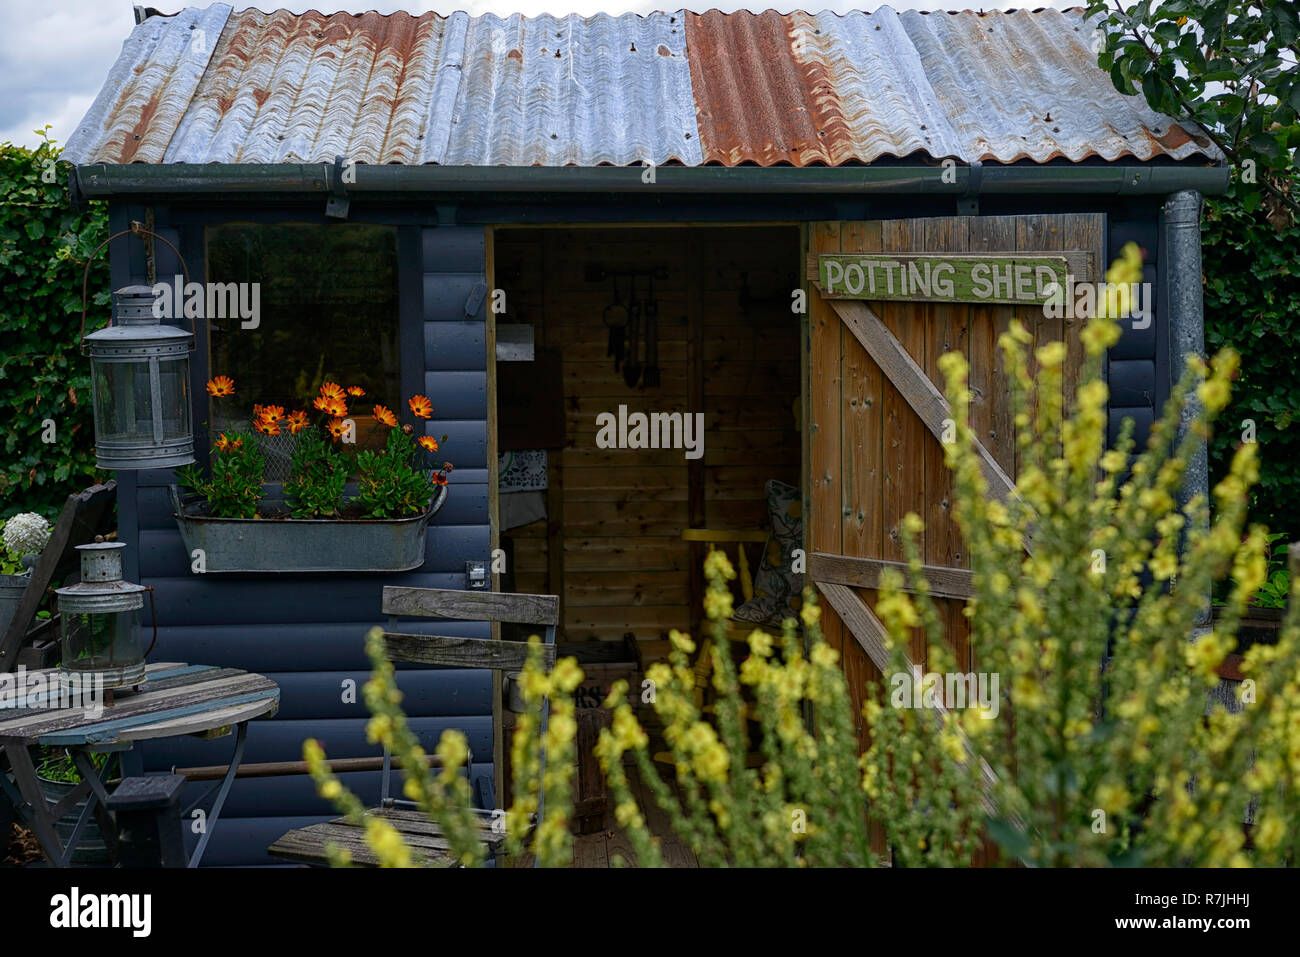 wooden, garden ,shed, gardens, gardening, blue,navy, wood, hut,attractive,garden feature,potting shed,RM Floral Stock Photo